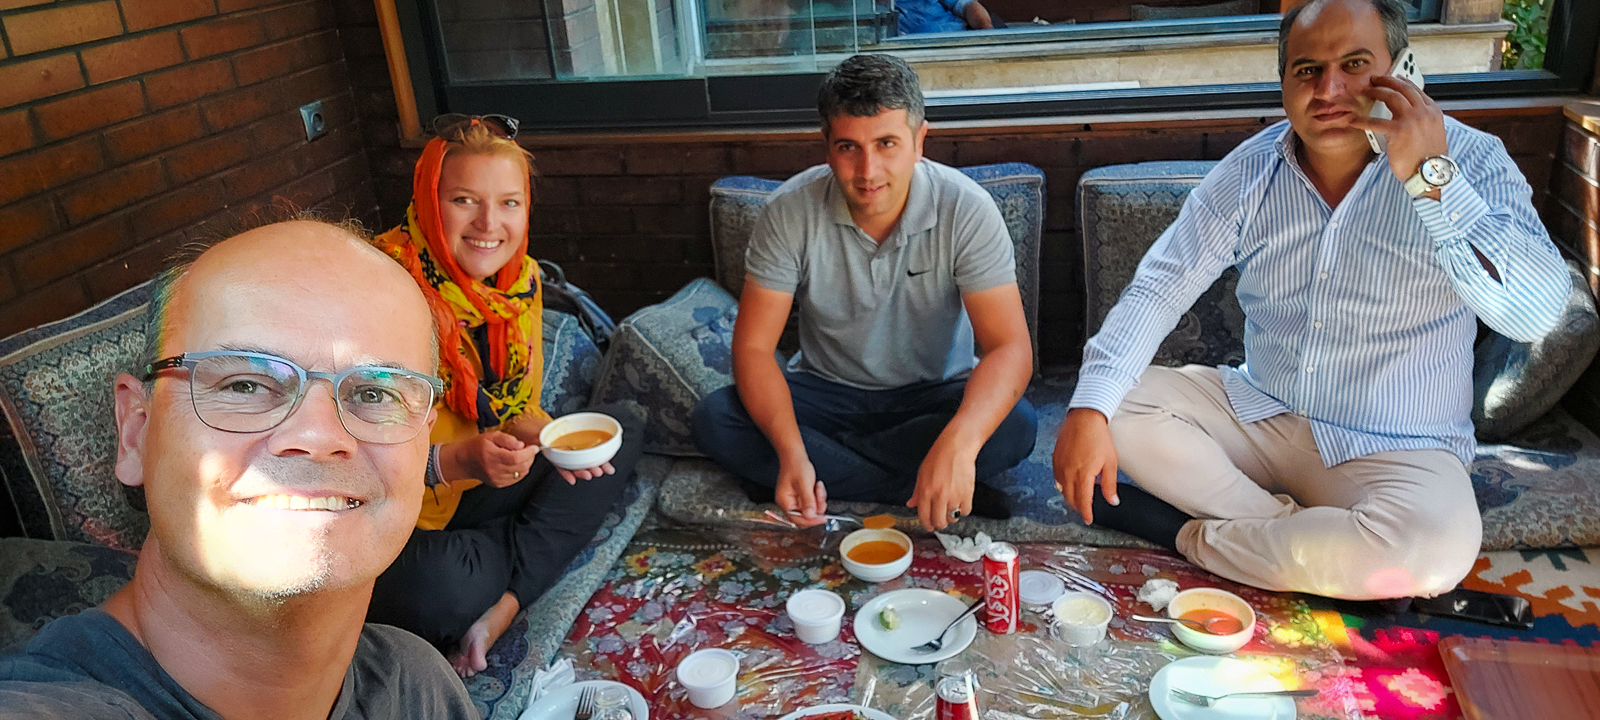 <span  class="uc_style_uc_tiles_grid_image_elementor_uc_items_attribute_title" style="color:#ffffff;">Again Iranian people who helped us (to fix some things at the truck): afterwards they invited us for lunch</span>